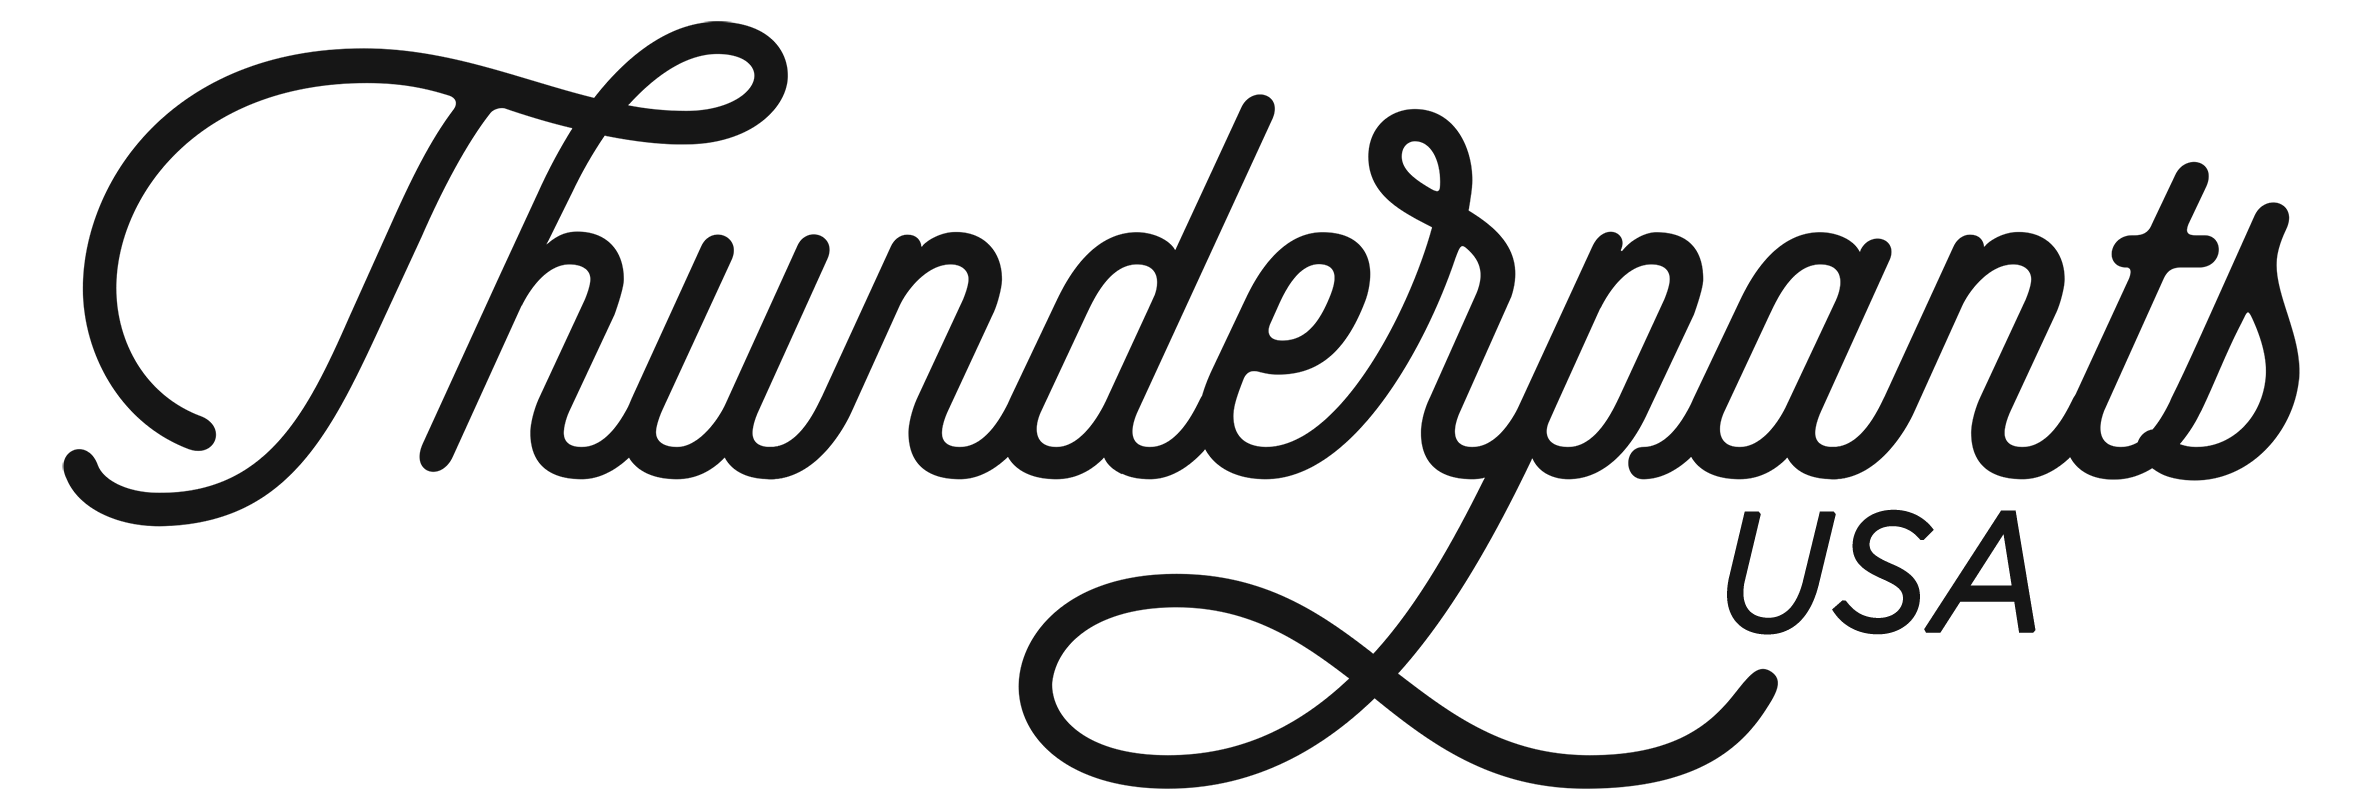 Thunderpants - Organic Cotton Underwear Made in the USA. Wedgie